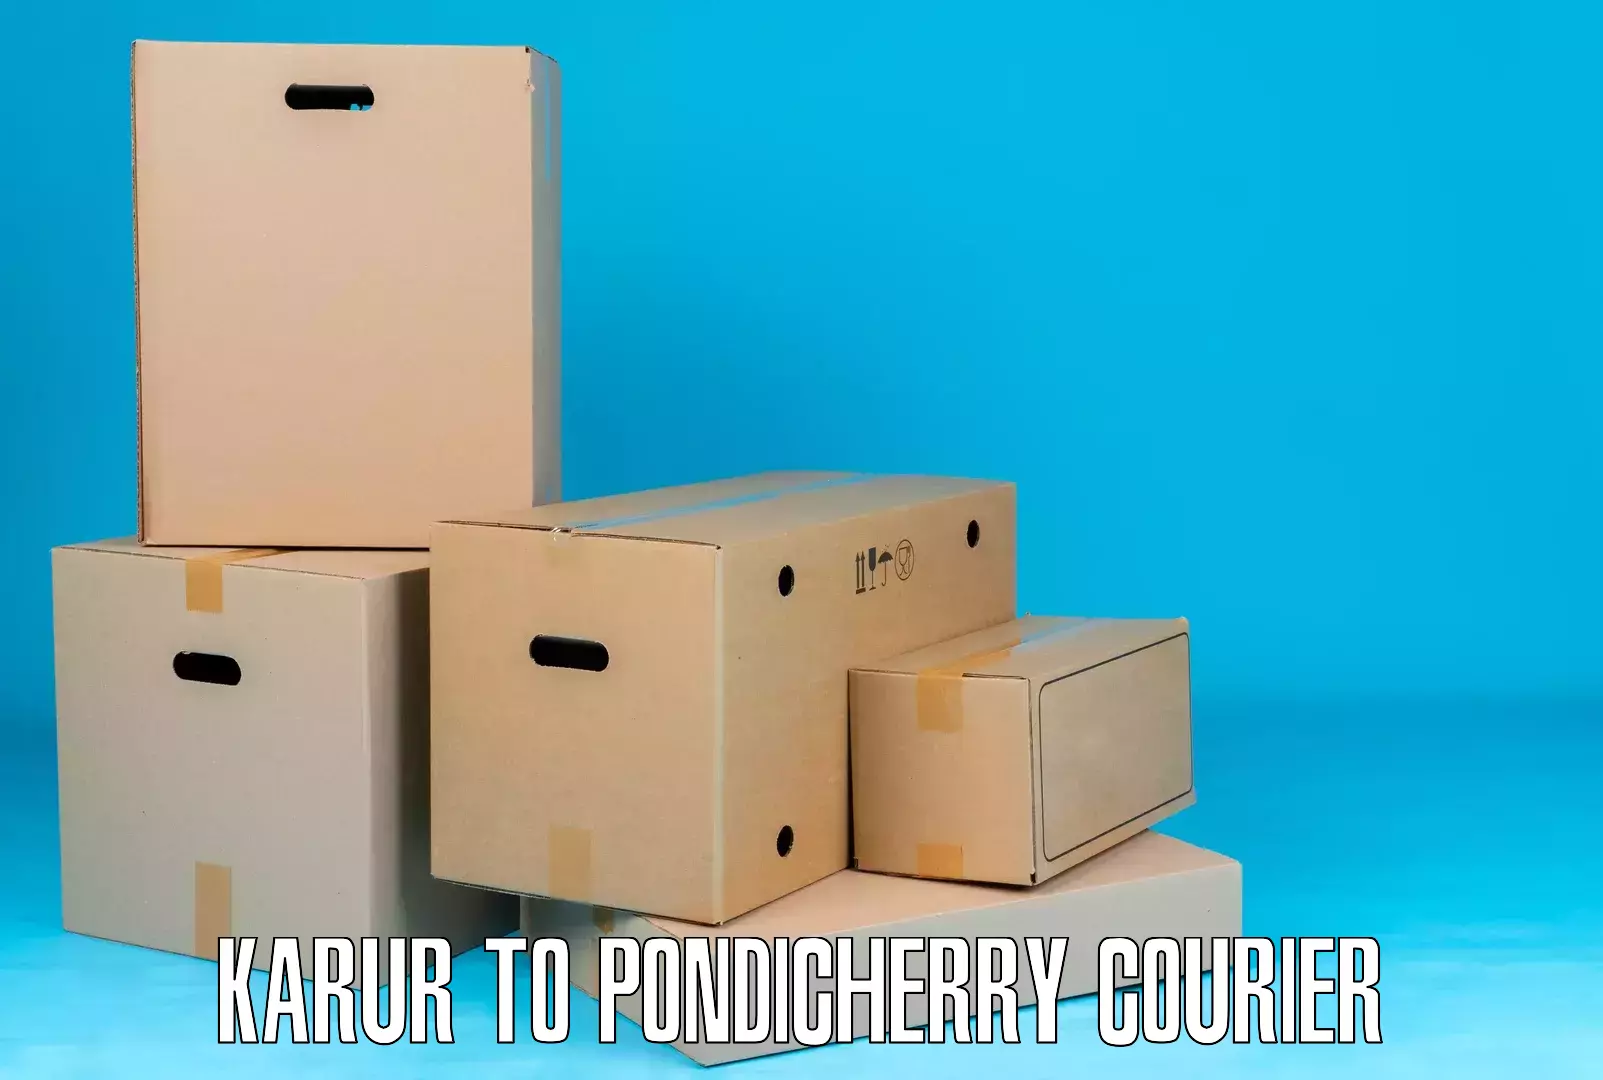 Subscription-based courier Karur to Pondicherry